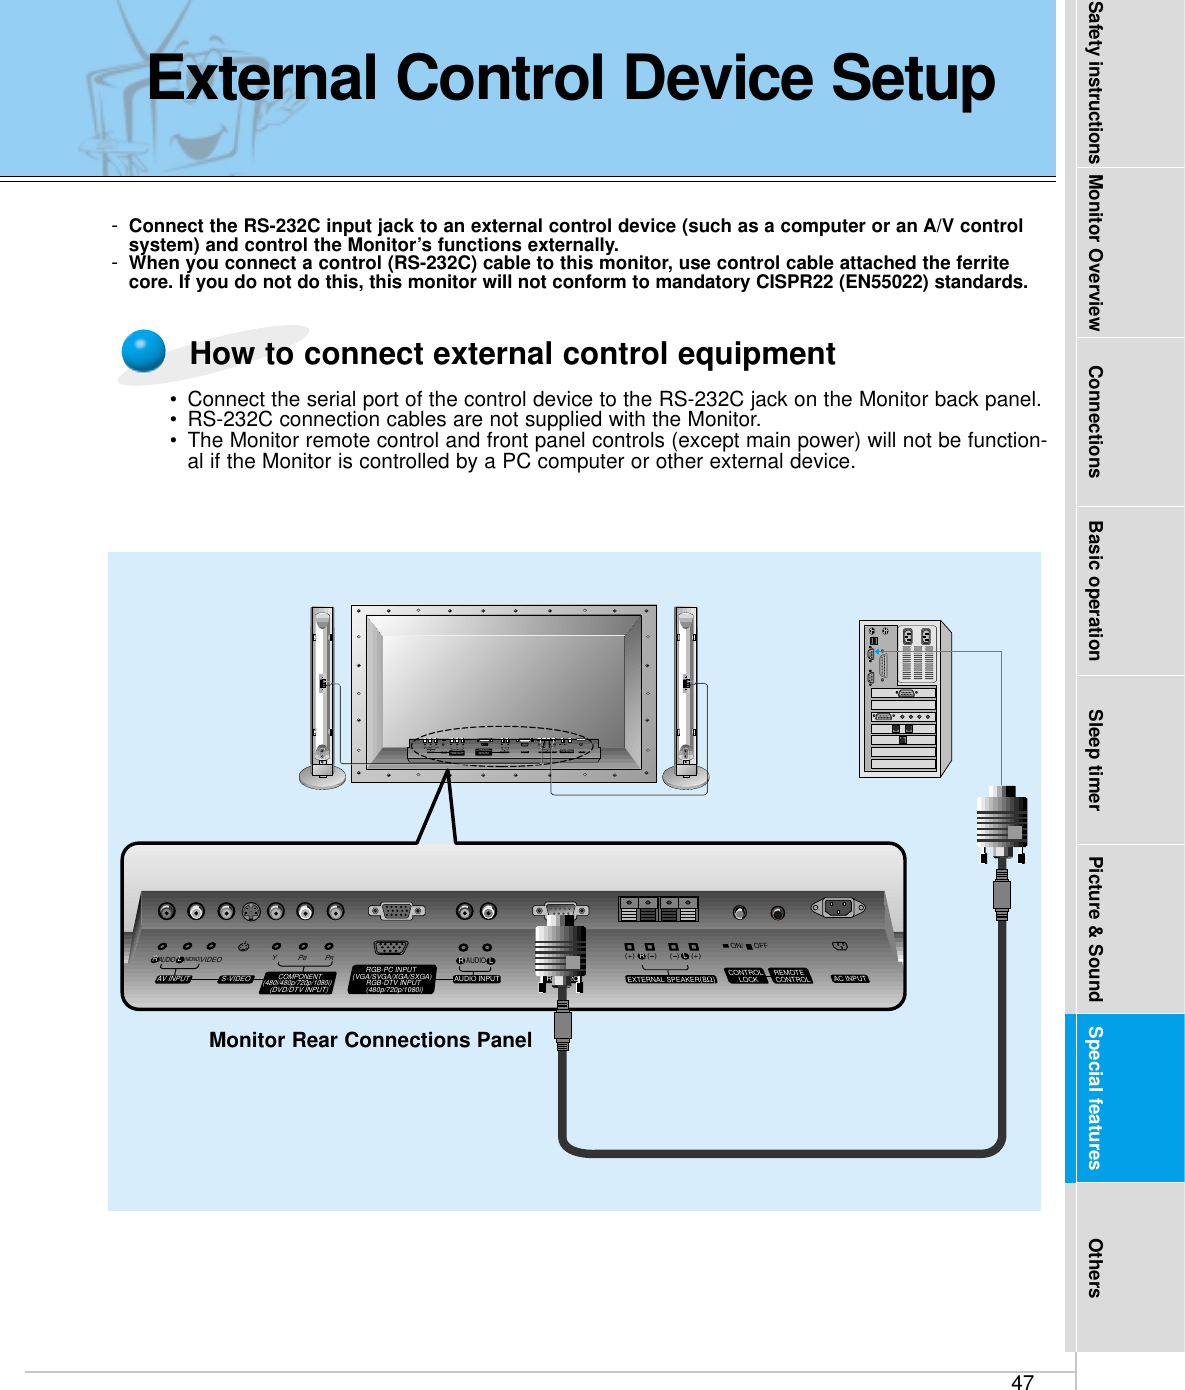 47Safety instructions Monitor Overview Connections Basic operation Sleep timer Picture &amp; Sound Special features Others-Connect the RS-232C input jack to an external control device (such as a computer or an A/V controlsystem) and control the Monitor’s functions externally.-When you connect a control (RS-232C) cable to this monitor, use control cable attached the ferritecore. If you do not do this, this monitor will not conform to mandatory CISPR22 (EN55022) standards.(+) (  ) (+)(  )AUDIO(MONO)RLVIDEO Y PBRPAV INPUTAUDIORL RLEXTERNAL SPEAKER (8Ω) AC INPUTCONTROLLOCK REMOTECONTROLAUDIO INPUTS-VIDEO COMPONENT(480i/480p/720p/1080i)RGB-PC INPUT(VGA/SVGA/XGA/SXGA)RGB-DTV INPUT(480p/720p/1080i)(DVD/DTV INPUT)(+) (  ) (+)(  )AUDIO(MONO)RLAV INPUT S-VIDEOCOMPONENT(480i/480p/720p/1080i)(DVD/DTV INPUT)RGB-PC INPUTAUDIO INPUTEXTERNAL SPEAKER(8Ω)RLAC INPUT(VGA/SVGA/XGA/SXGA)RGB-DTV INPUT(480p/720p/1080i)VIDEO YPBPRRS-232CRS-232CRLAUDIOREMOTECONTROLCONTROLLOCKON/ OFFON/ OFFMonitor Rear Connections Panel•Connect the serial port of the control device to the RS-232C jack on the Monitor back panel.•RS-232C connection cables are not supplied with the Monitor.•The Monitor remote control and front panel controls (except main power) will not be function-al if the Monitor is controlled by a PC computer or other external device.How to connect external control equipmentExternal Control Device Setup